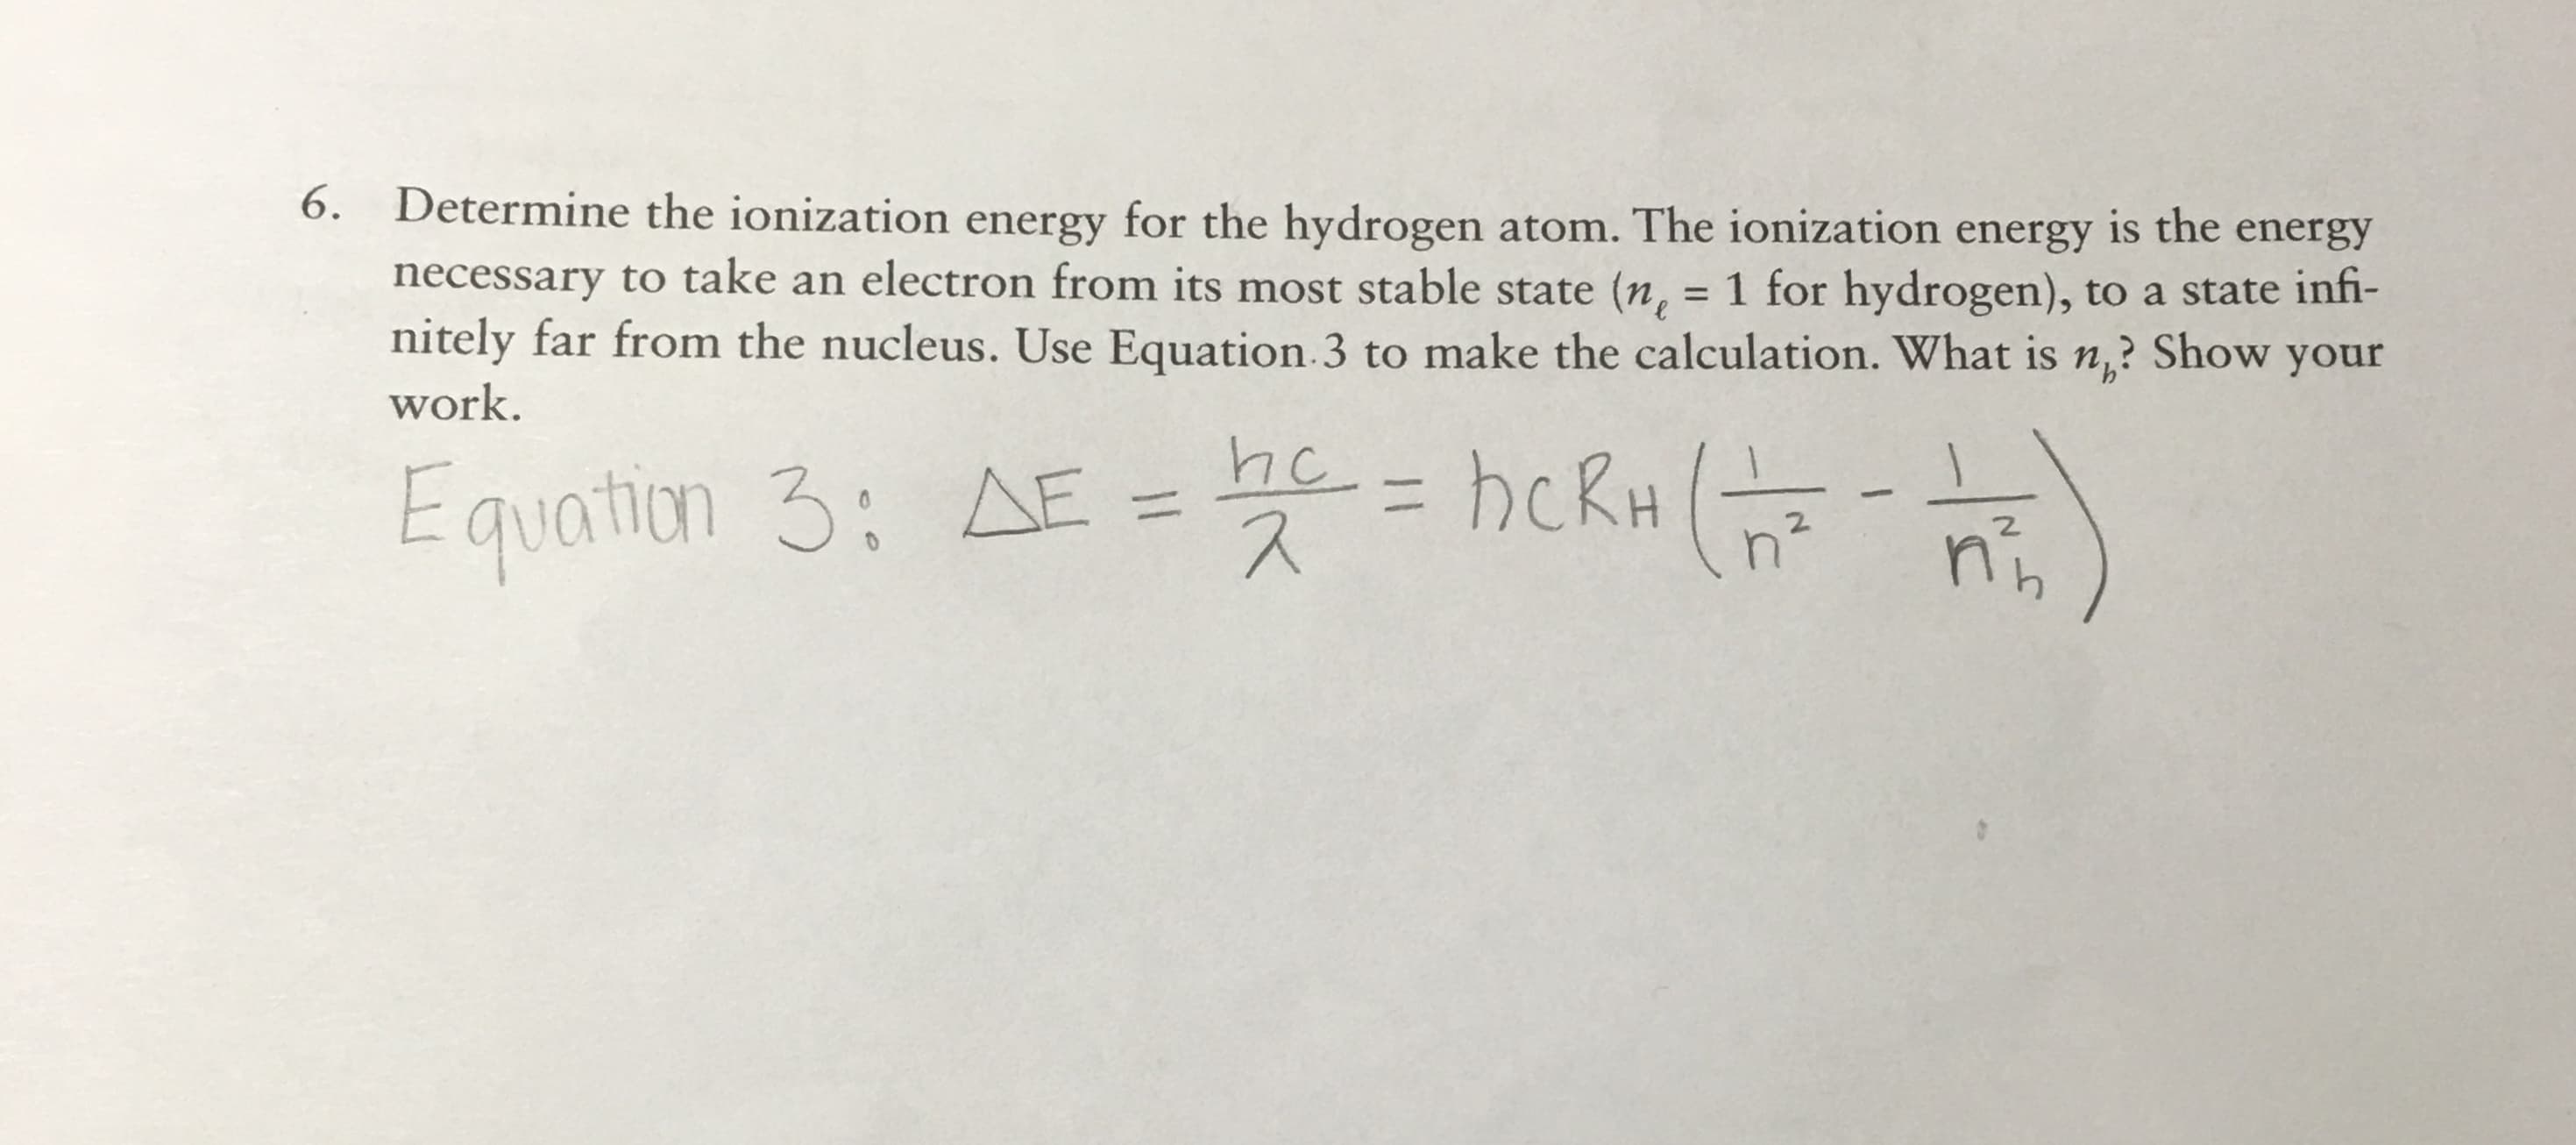 6. Determine the ionization energy for the hydrogen atom. The ionization energy is the energy
necessary to take an electron from its most stable state (n, = 1 for hydrogen), to a state infi-
nitely far from the nucleus. Use Equation 3 to make the calculation. What is n? Show your
work.
he hckH
Equation 3: A
E
2.
n
